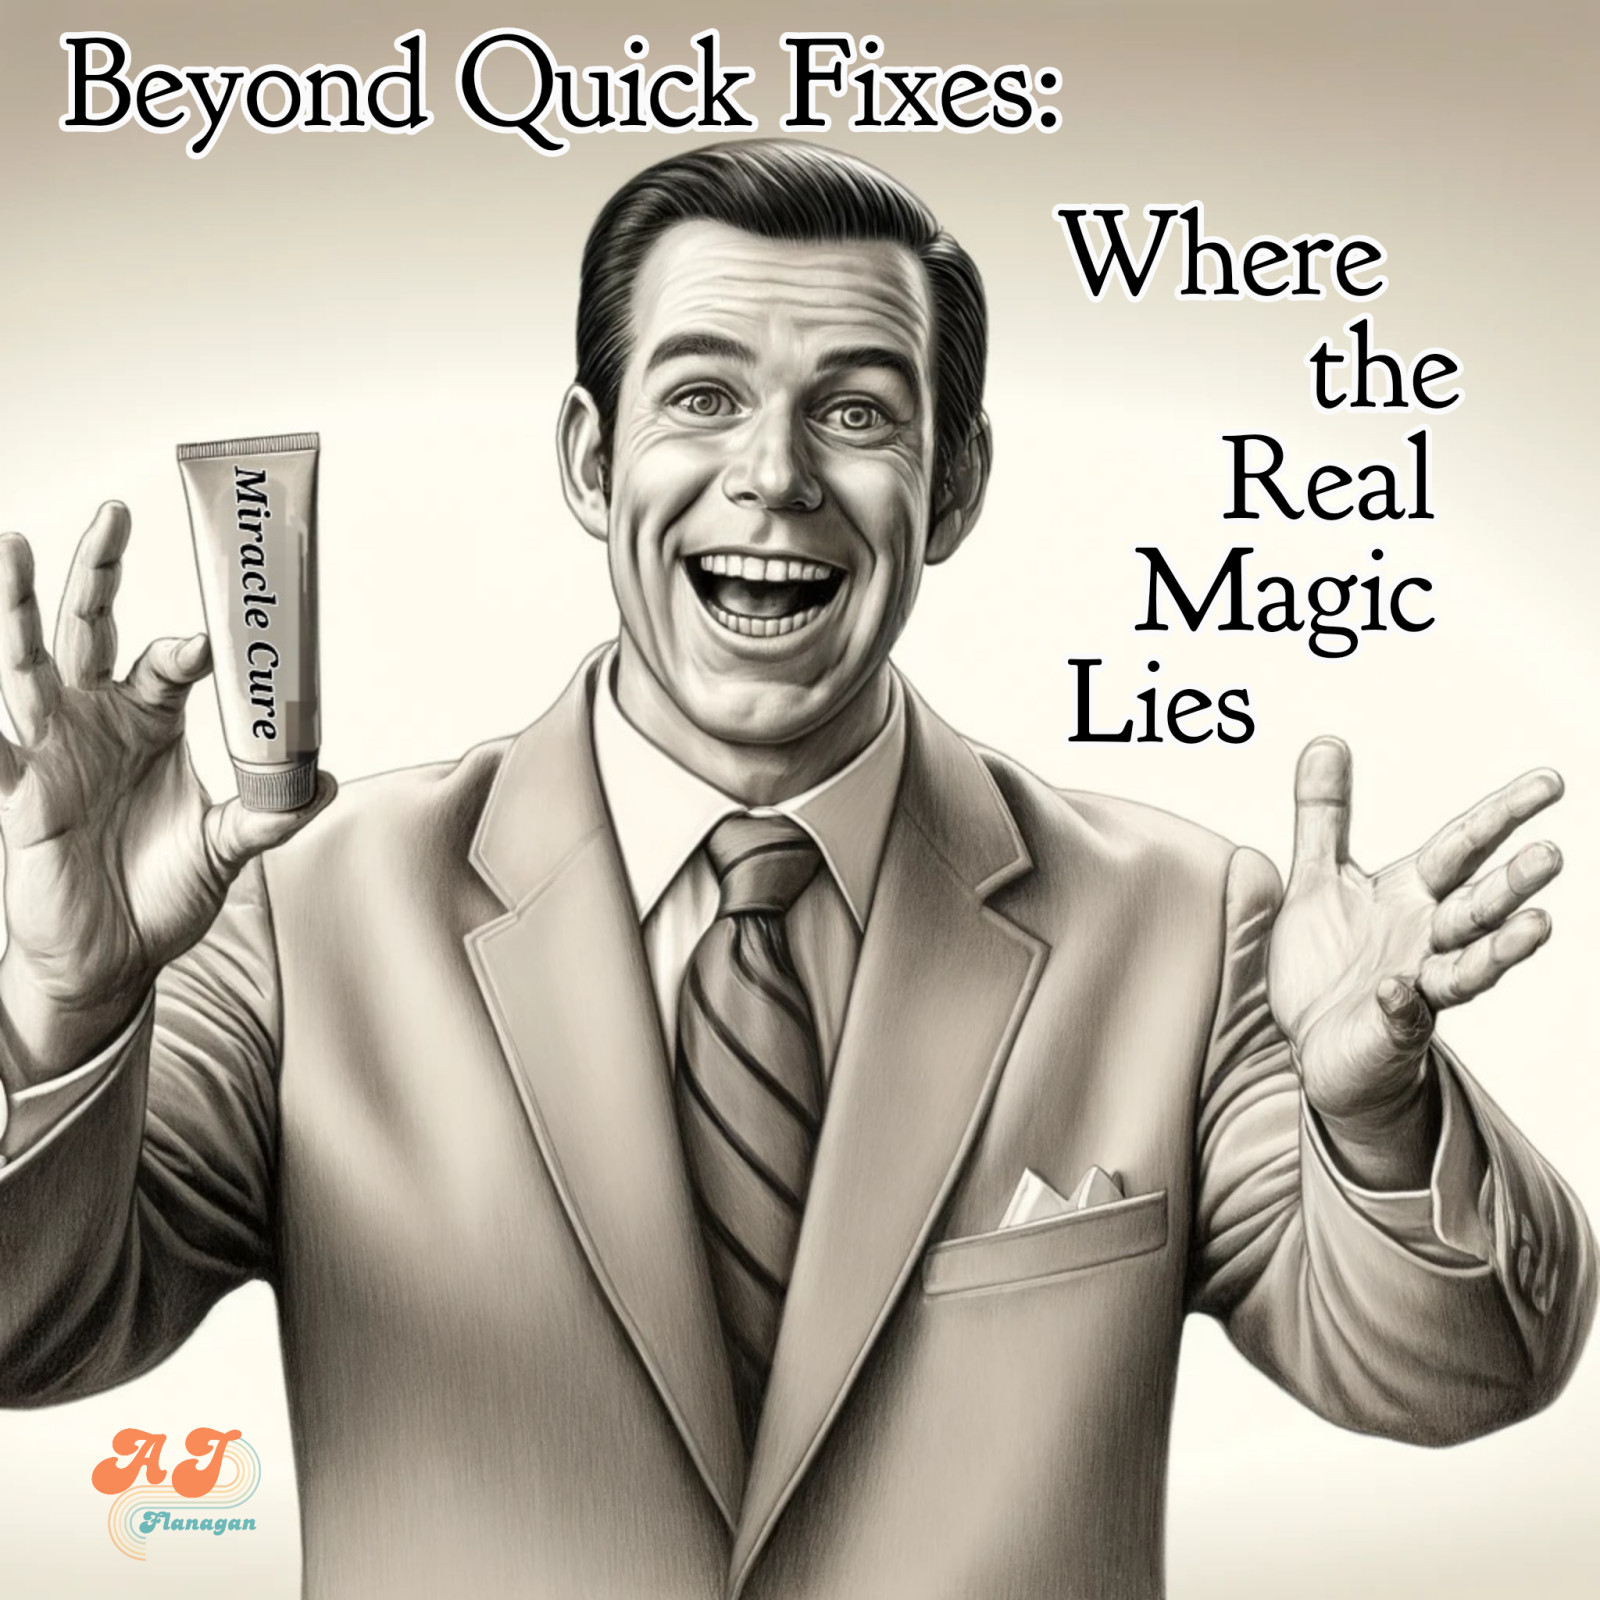 Beyond Quick Fixes: Where the Real Magic Lies